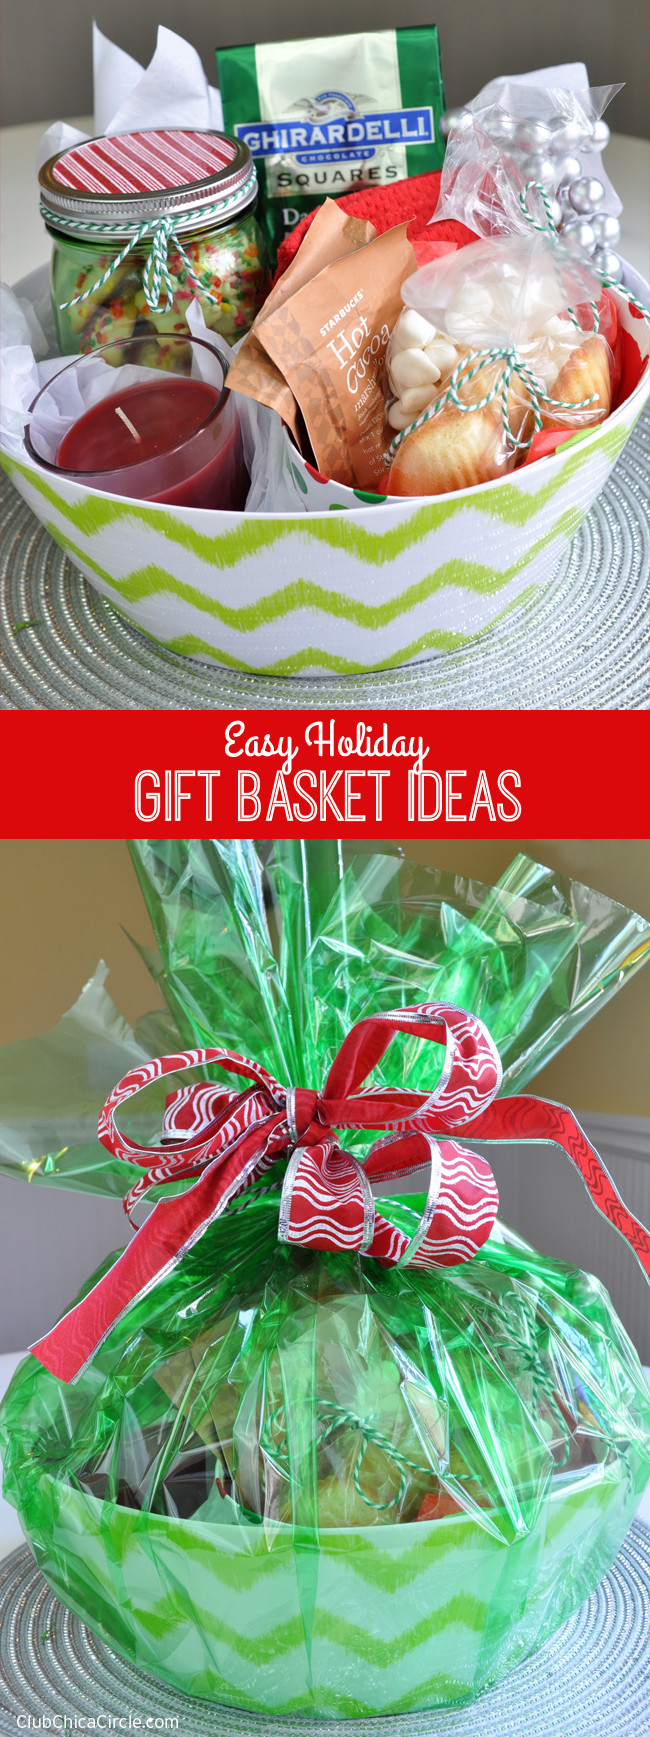 Christmas Party Giveaway Ideas
 Easy Holiday Gift Basket Ideas Giveaway